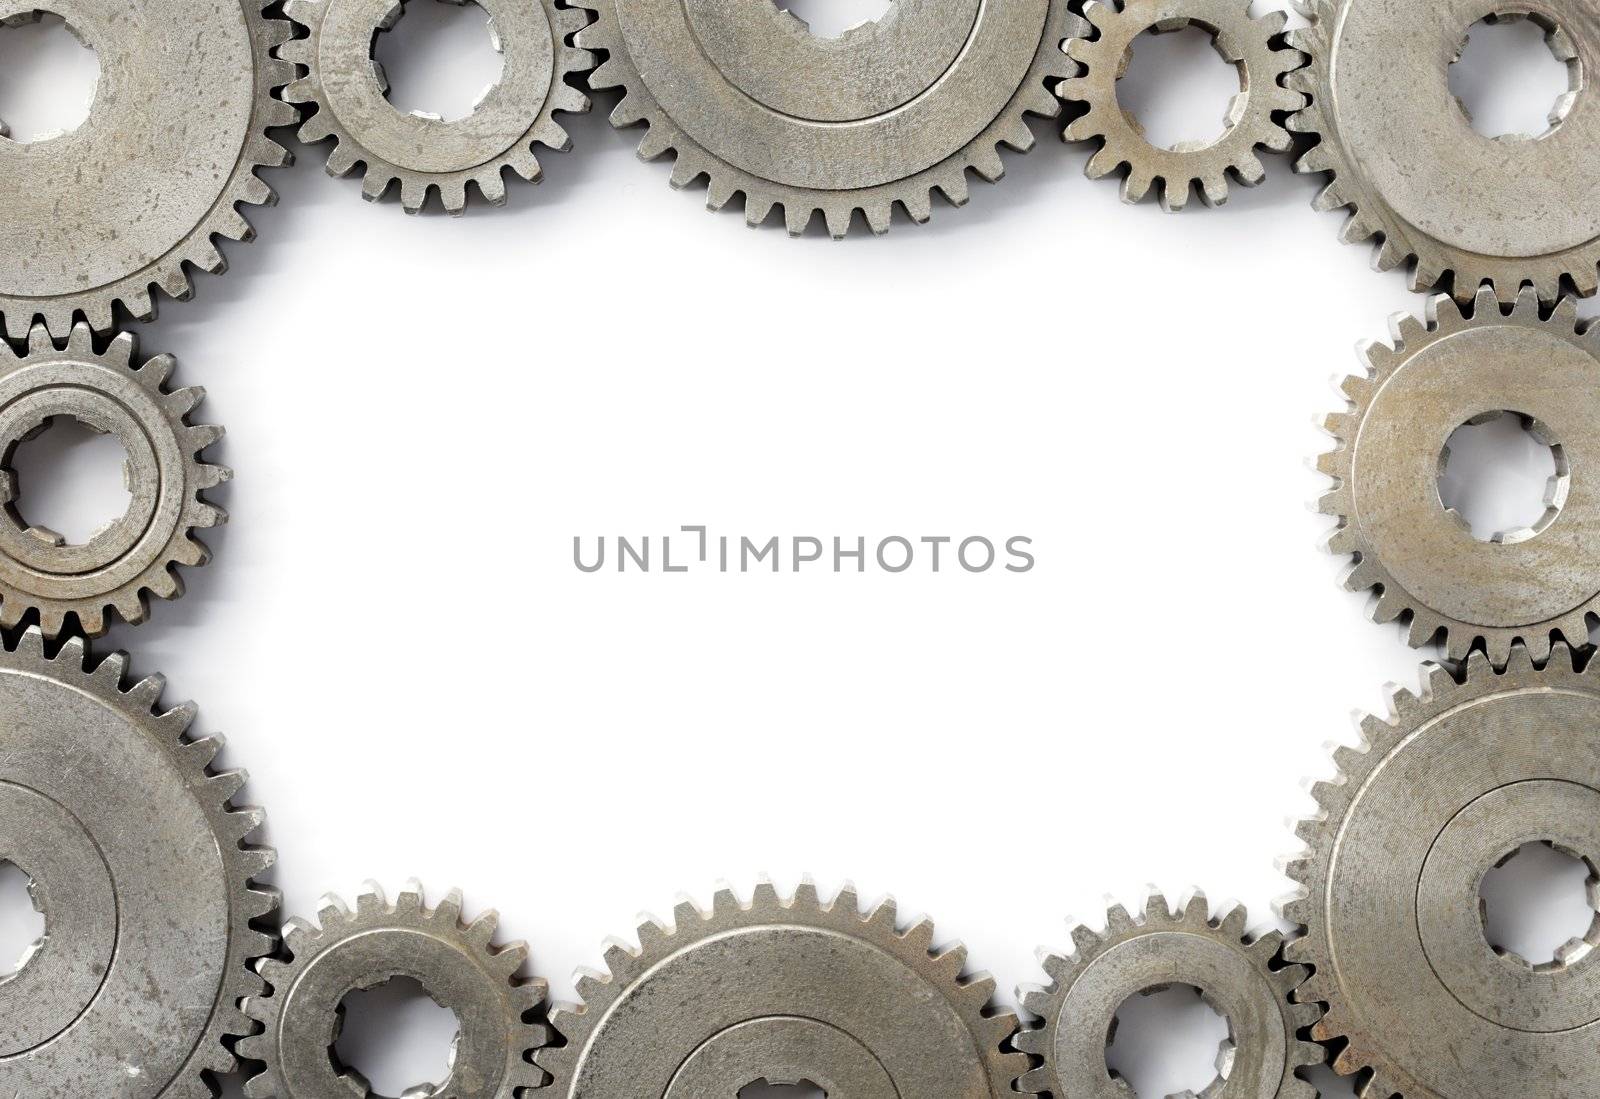 Background image with a frame made of old cog gear wheels.